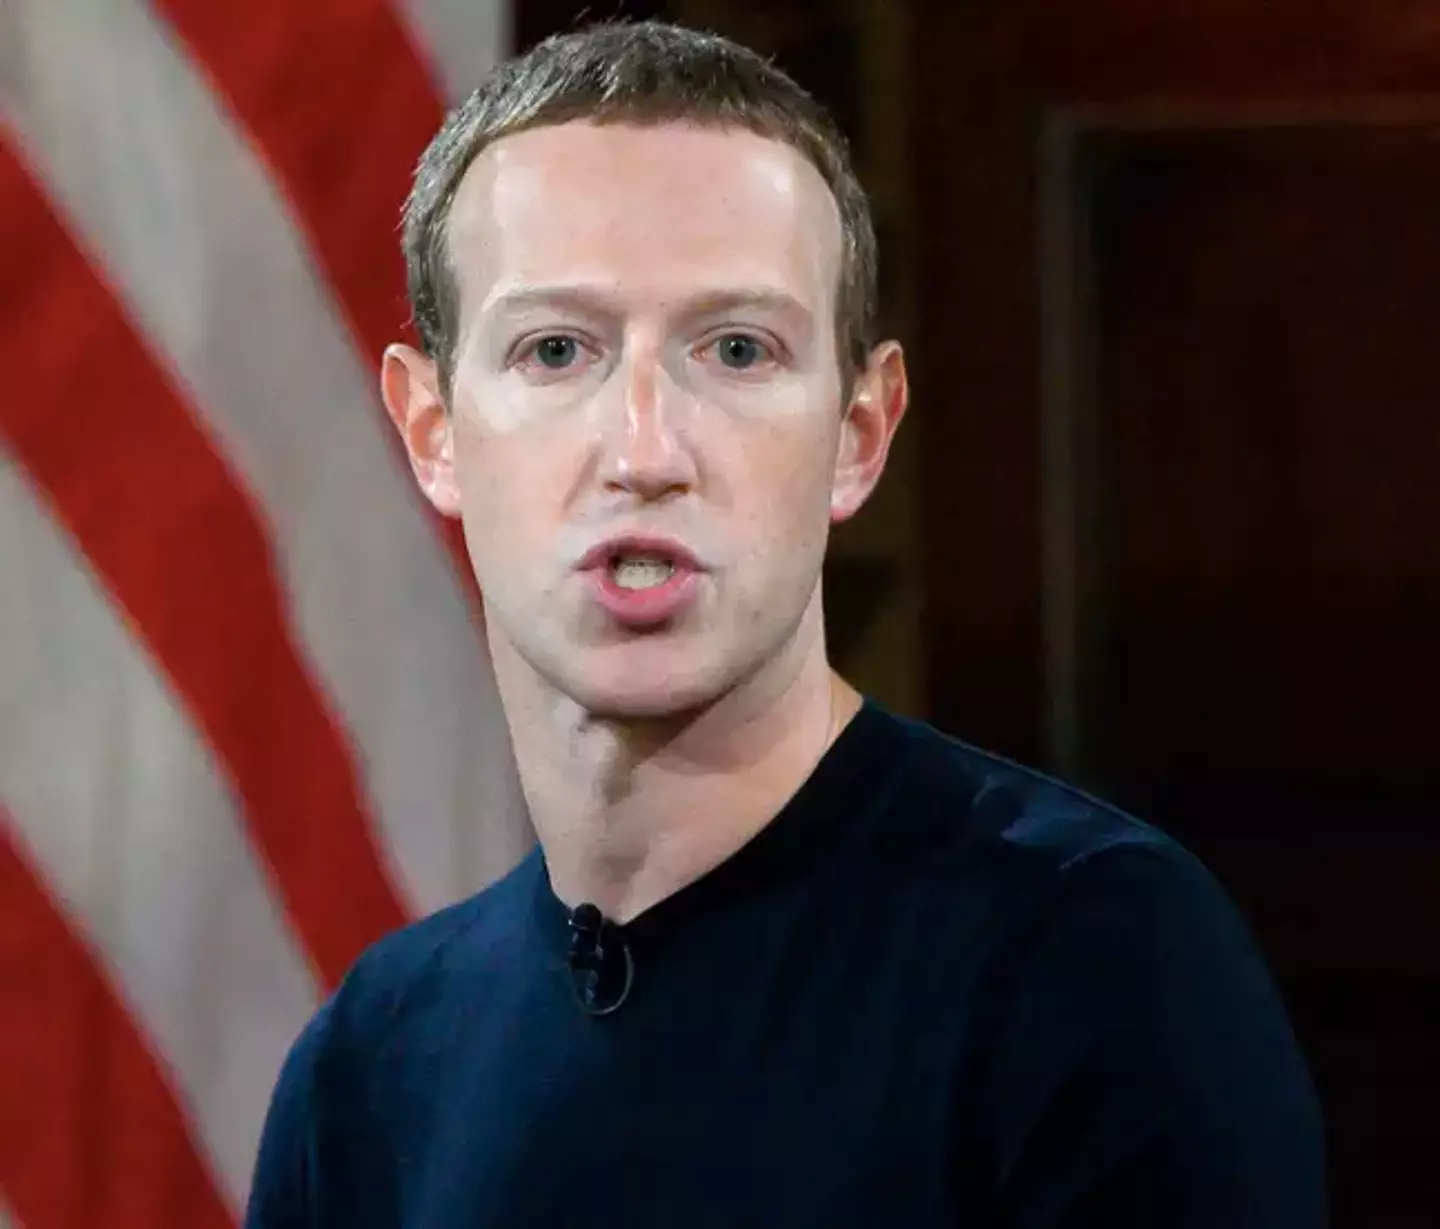 Mark Zuckerberg has launched new social media app Threads, which has been described as a 'Twitter killer' by some.